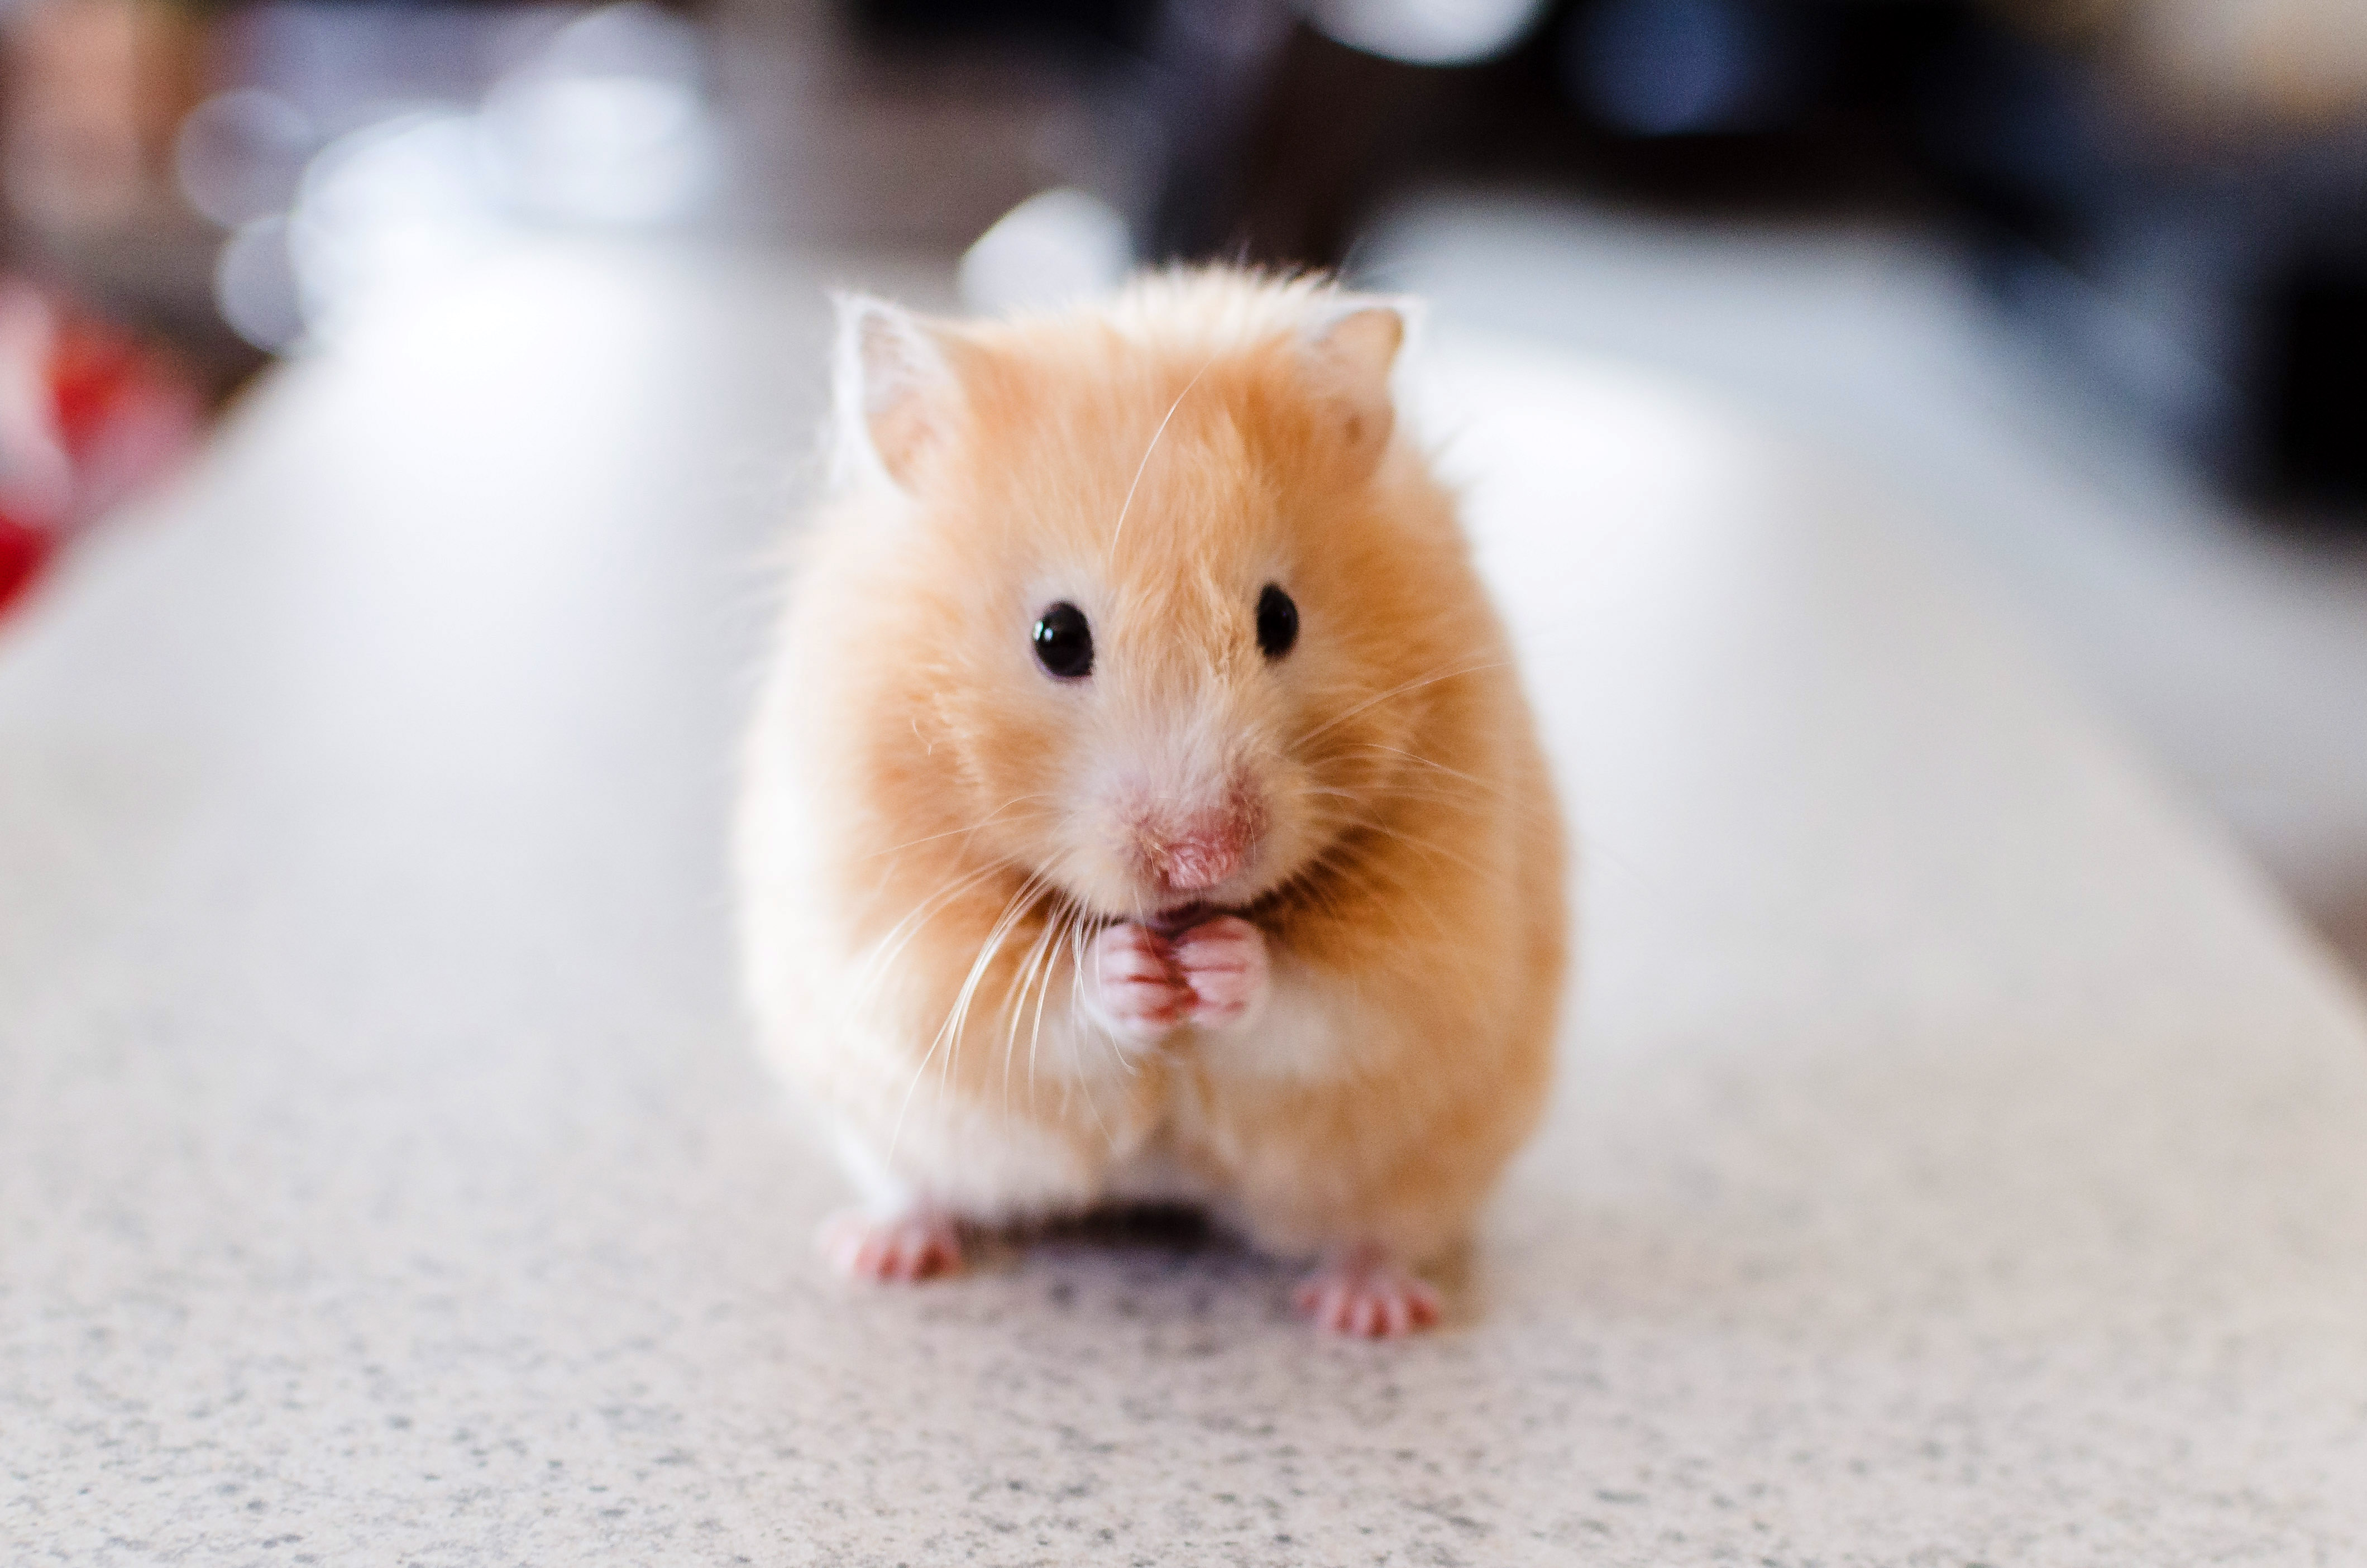 Hamster Standing Up image - Free stock photo - Public Domain photo - CC0  Images